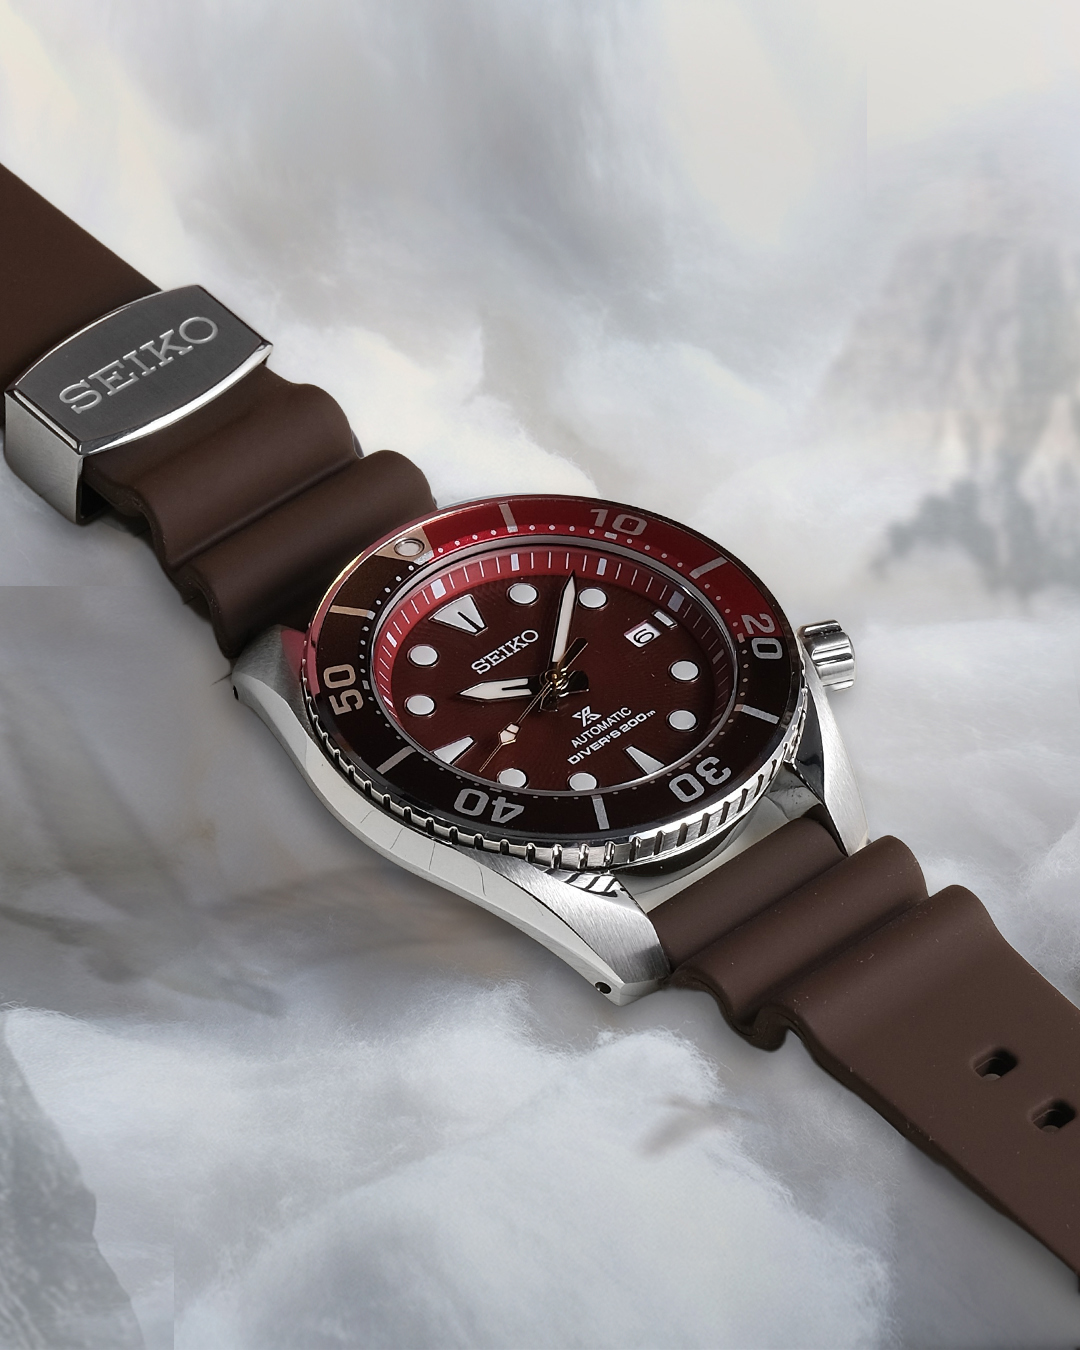 Seiko launches its third Philippine limited edition Prospex Watch -  